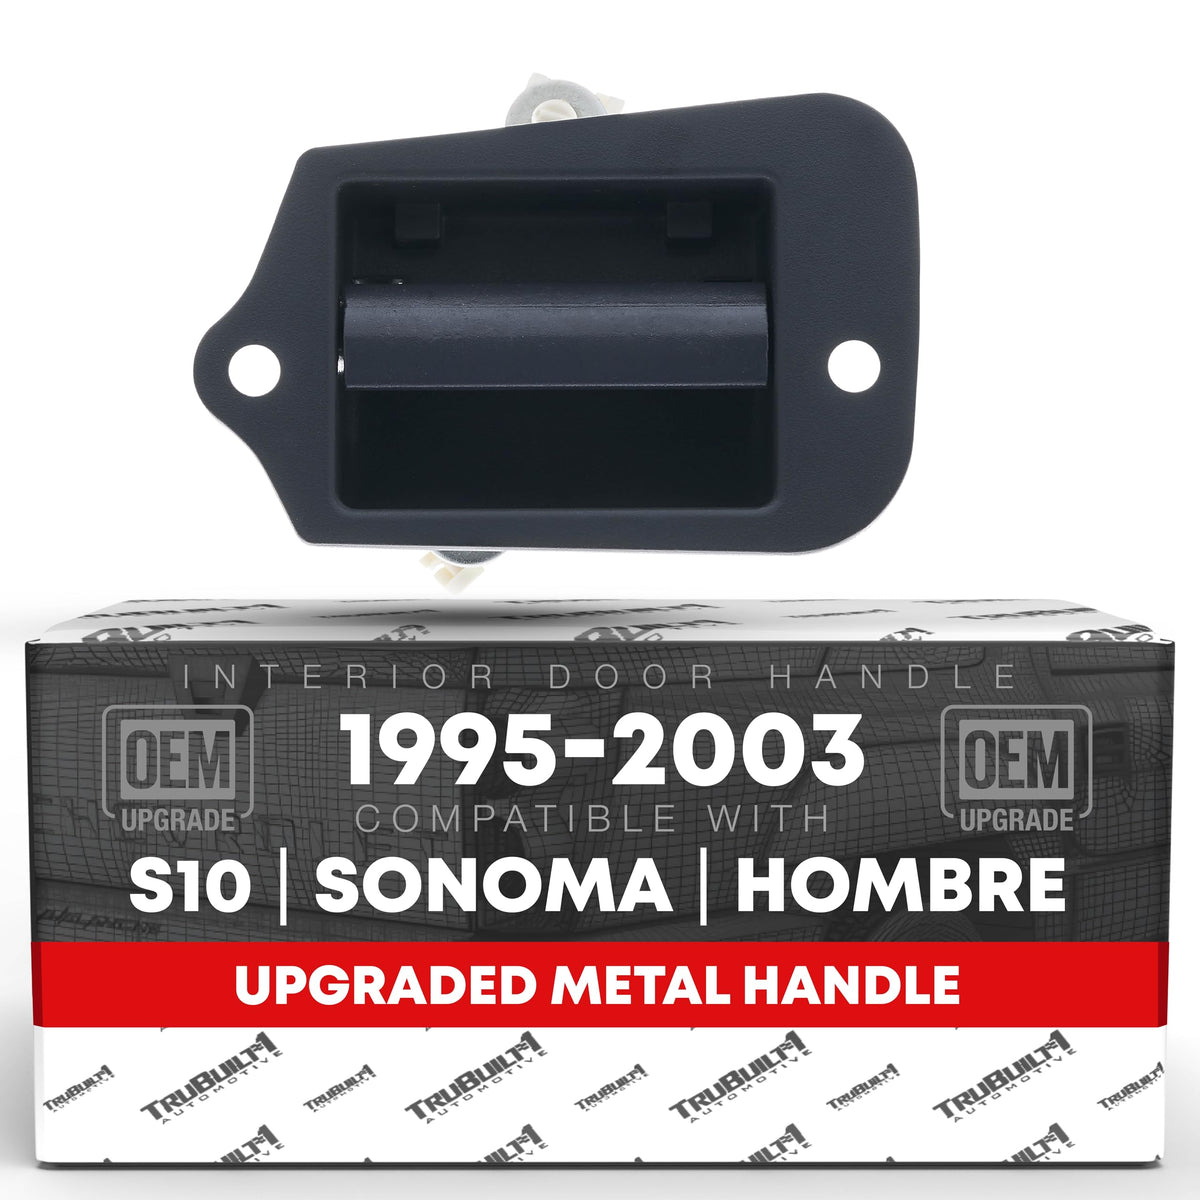 Interior Door Handle, Rear Left Driver Side - Compatible with 1995-2003 Chevrolet S10, 1996-2003 GMC Sonoma, 1998 Isuzu Hombre Extended Cab - Textured, Metal - OEM 15760310-M, 74300, GM1552101